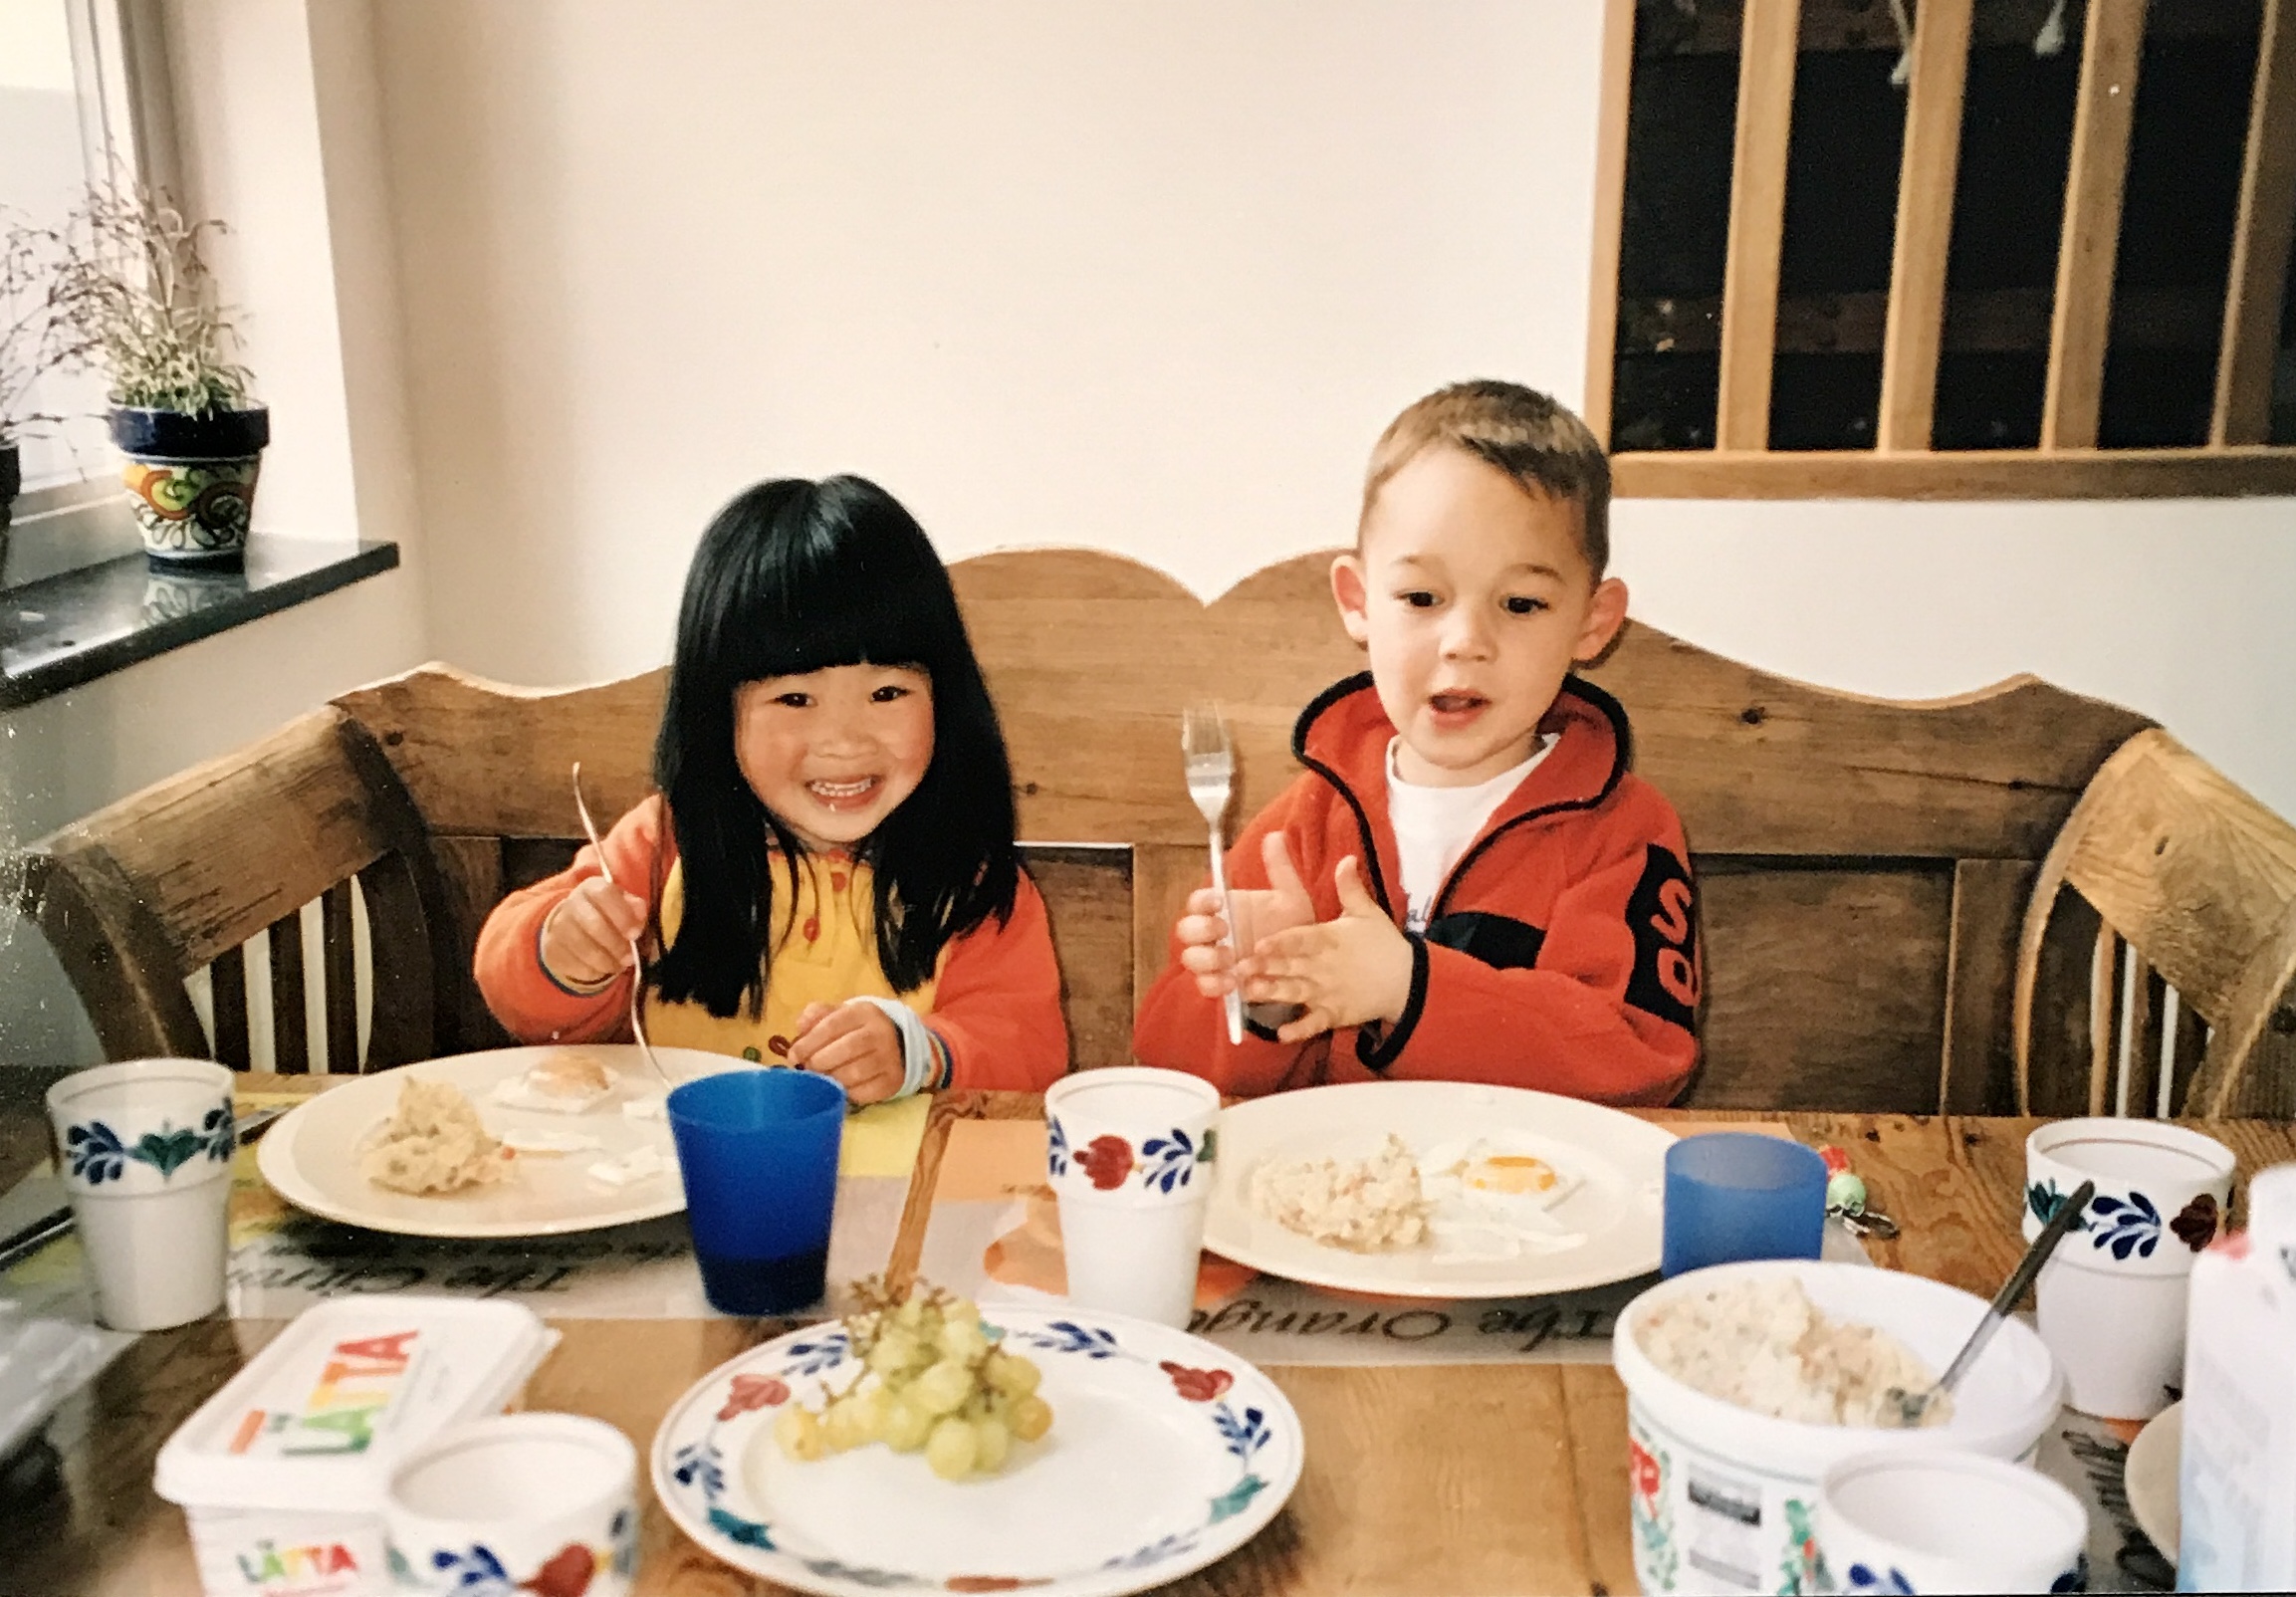 Xiangxia van den Ham, Dumpling Stories – a boy and a girl sitting side by side at a large wooden table with white and blue plats and mugs and having breakfast. Xiangxia (left) has long black hair and a fringe and smiling big.